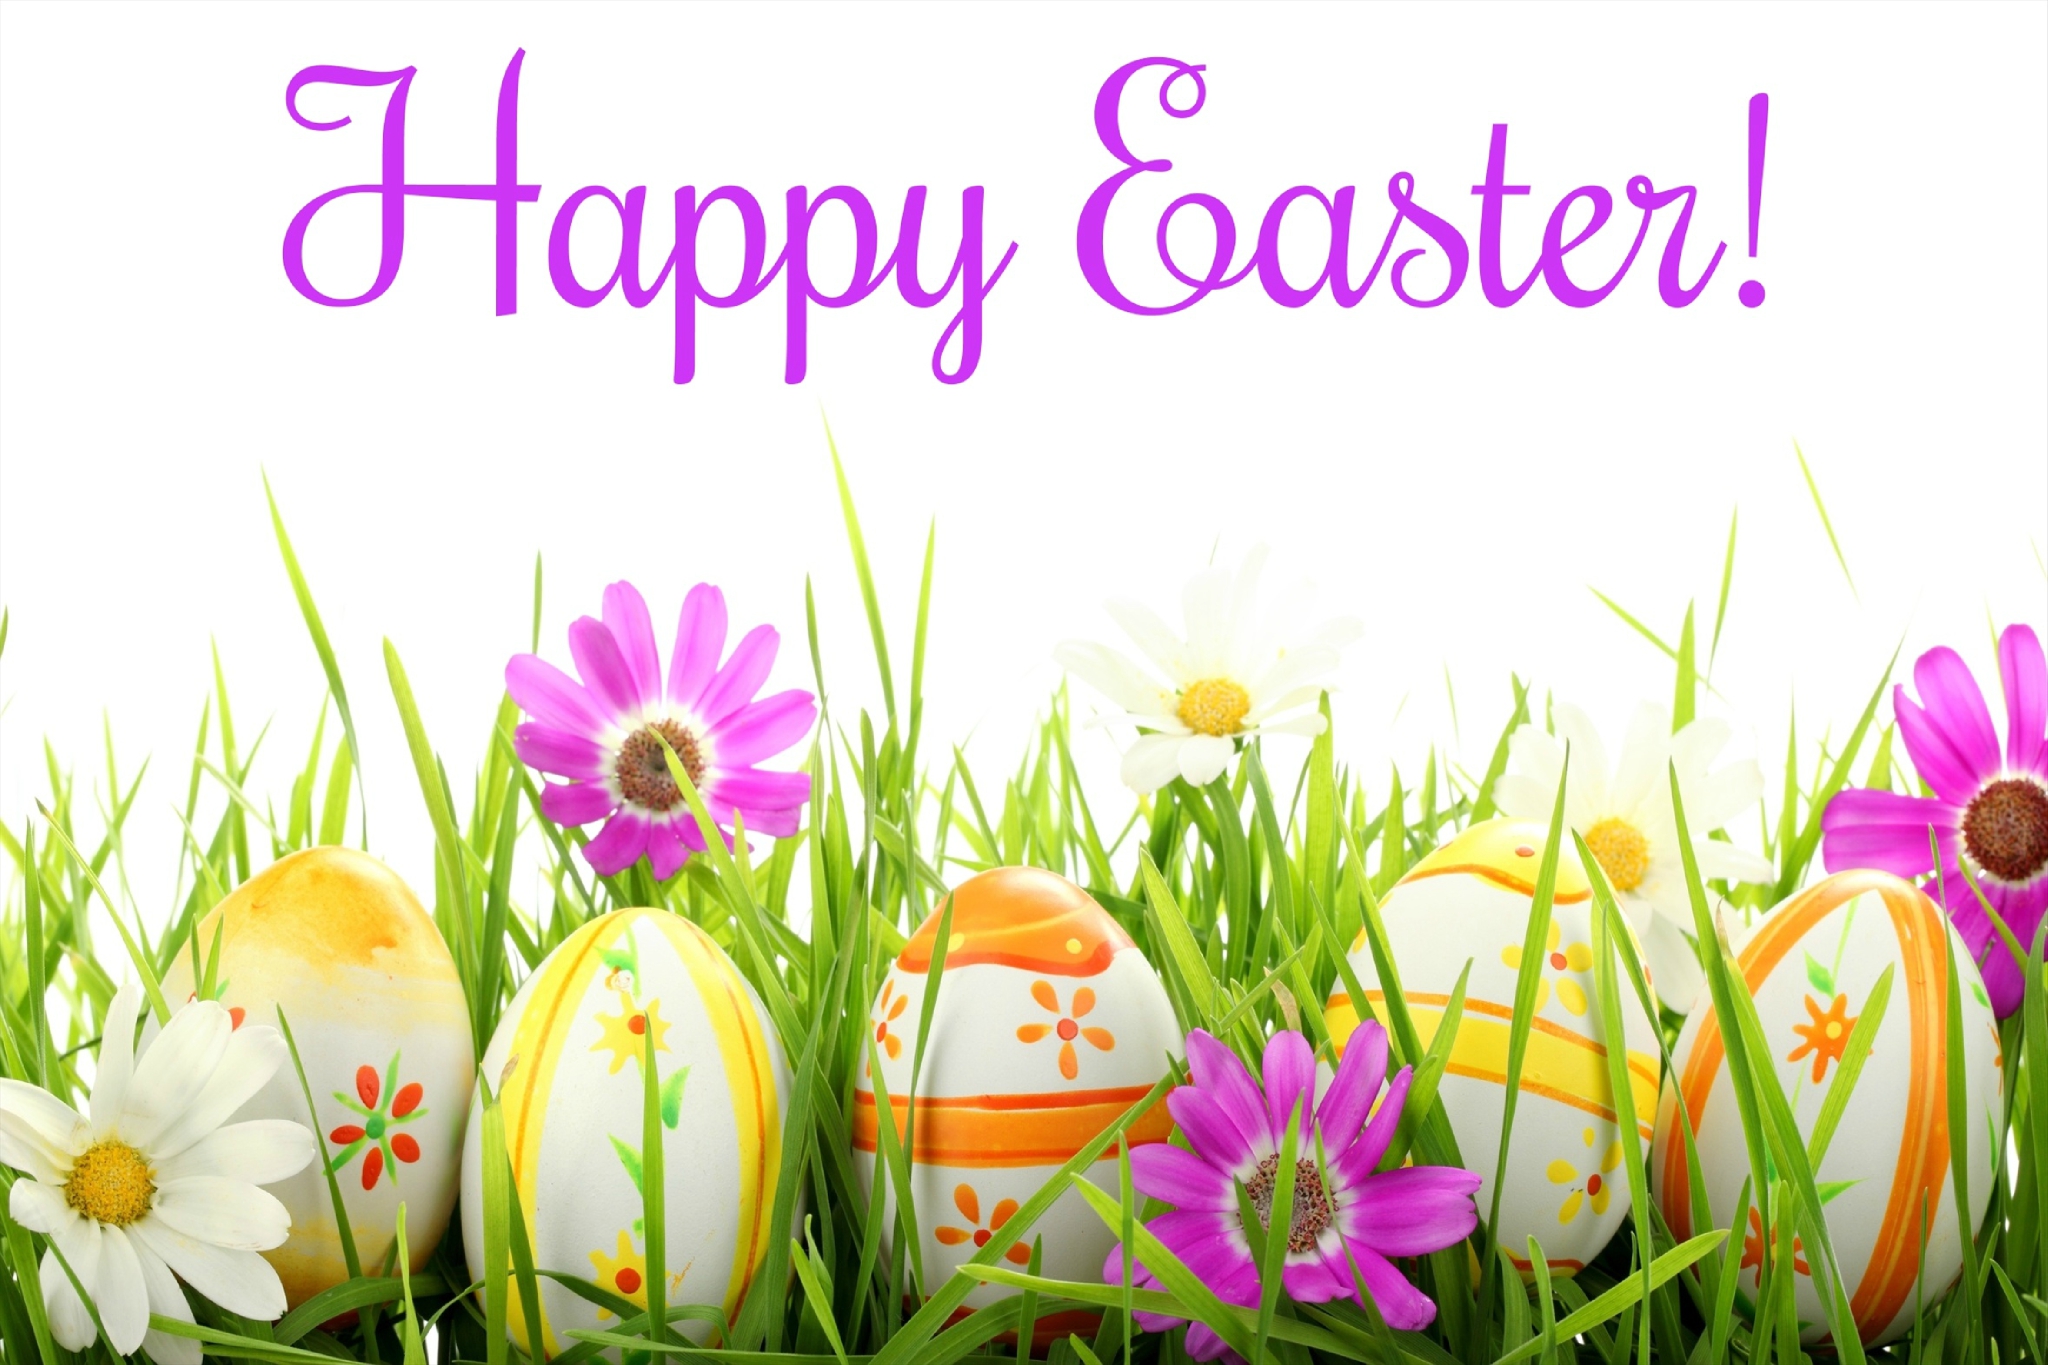 Happy Easter Image Pictures Quotes Wishes Messages